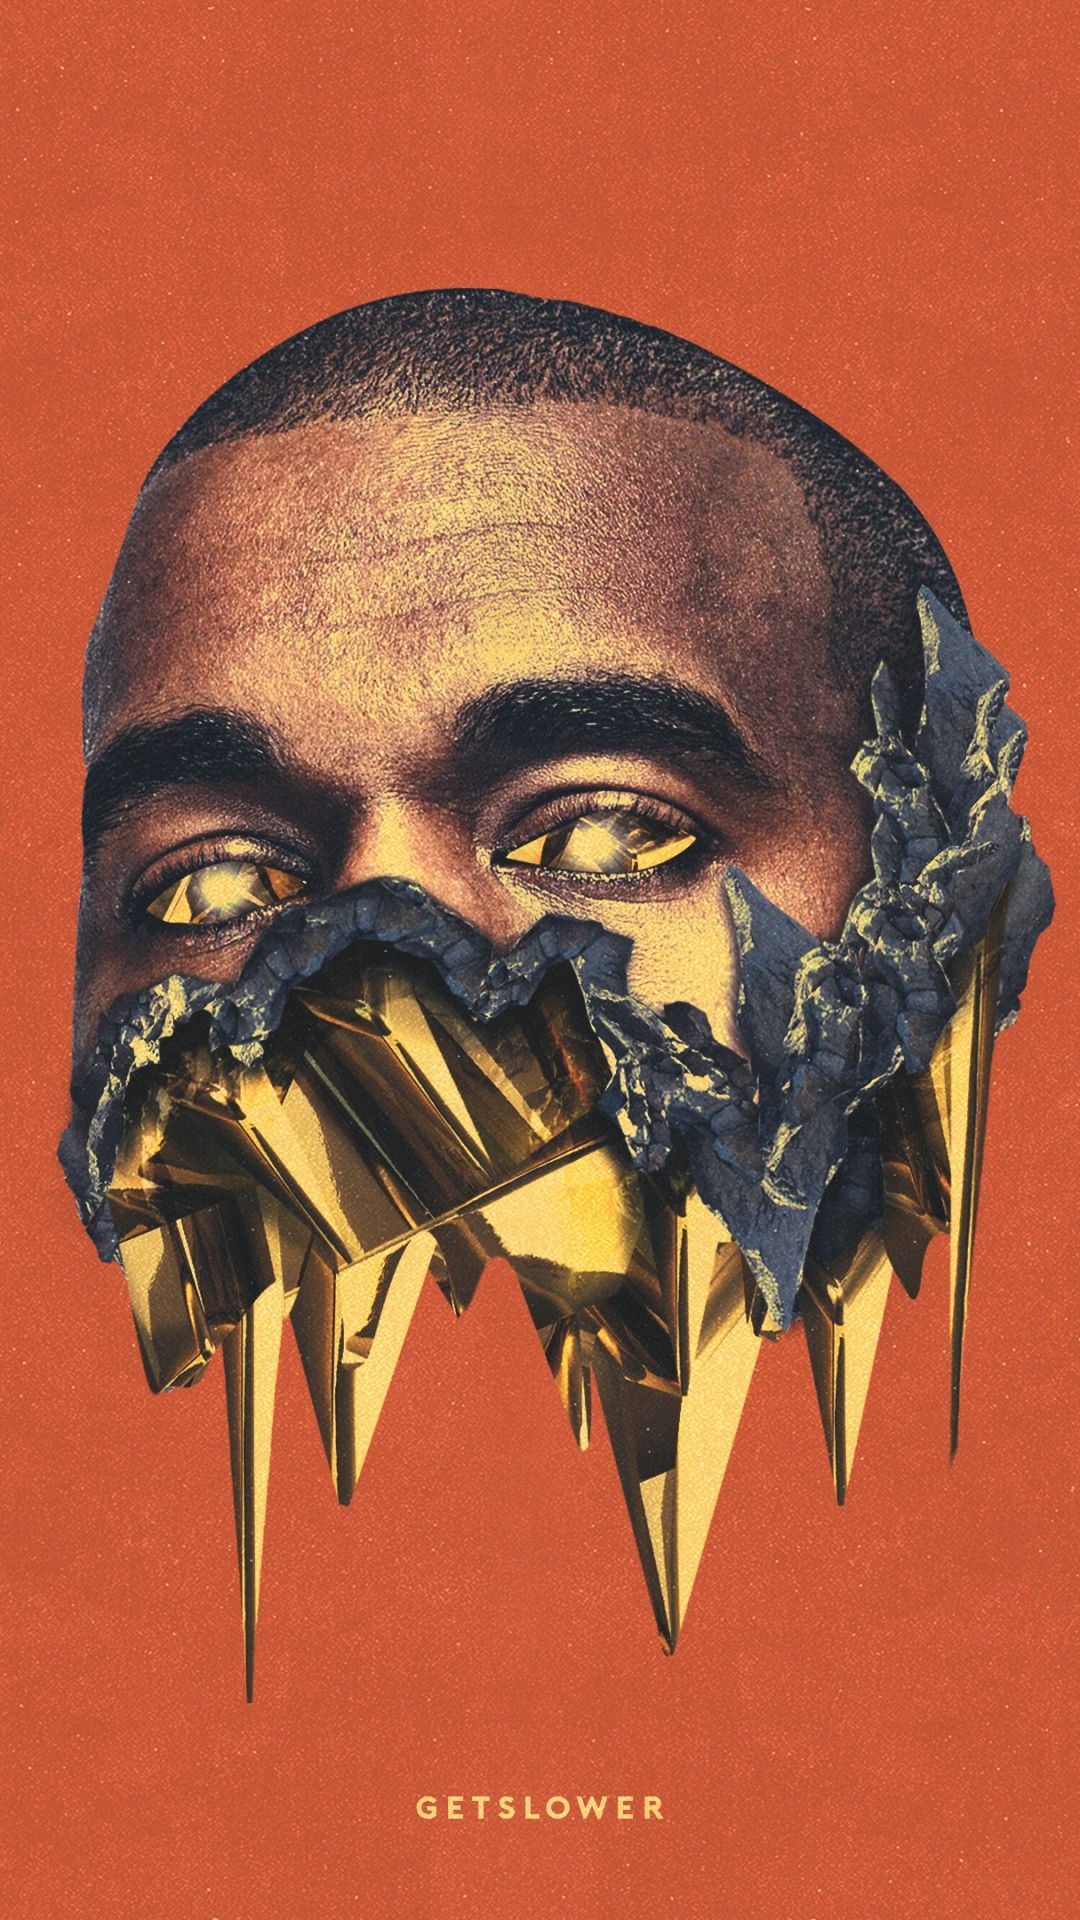 Kanye West iPhone Wallpapers